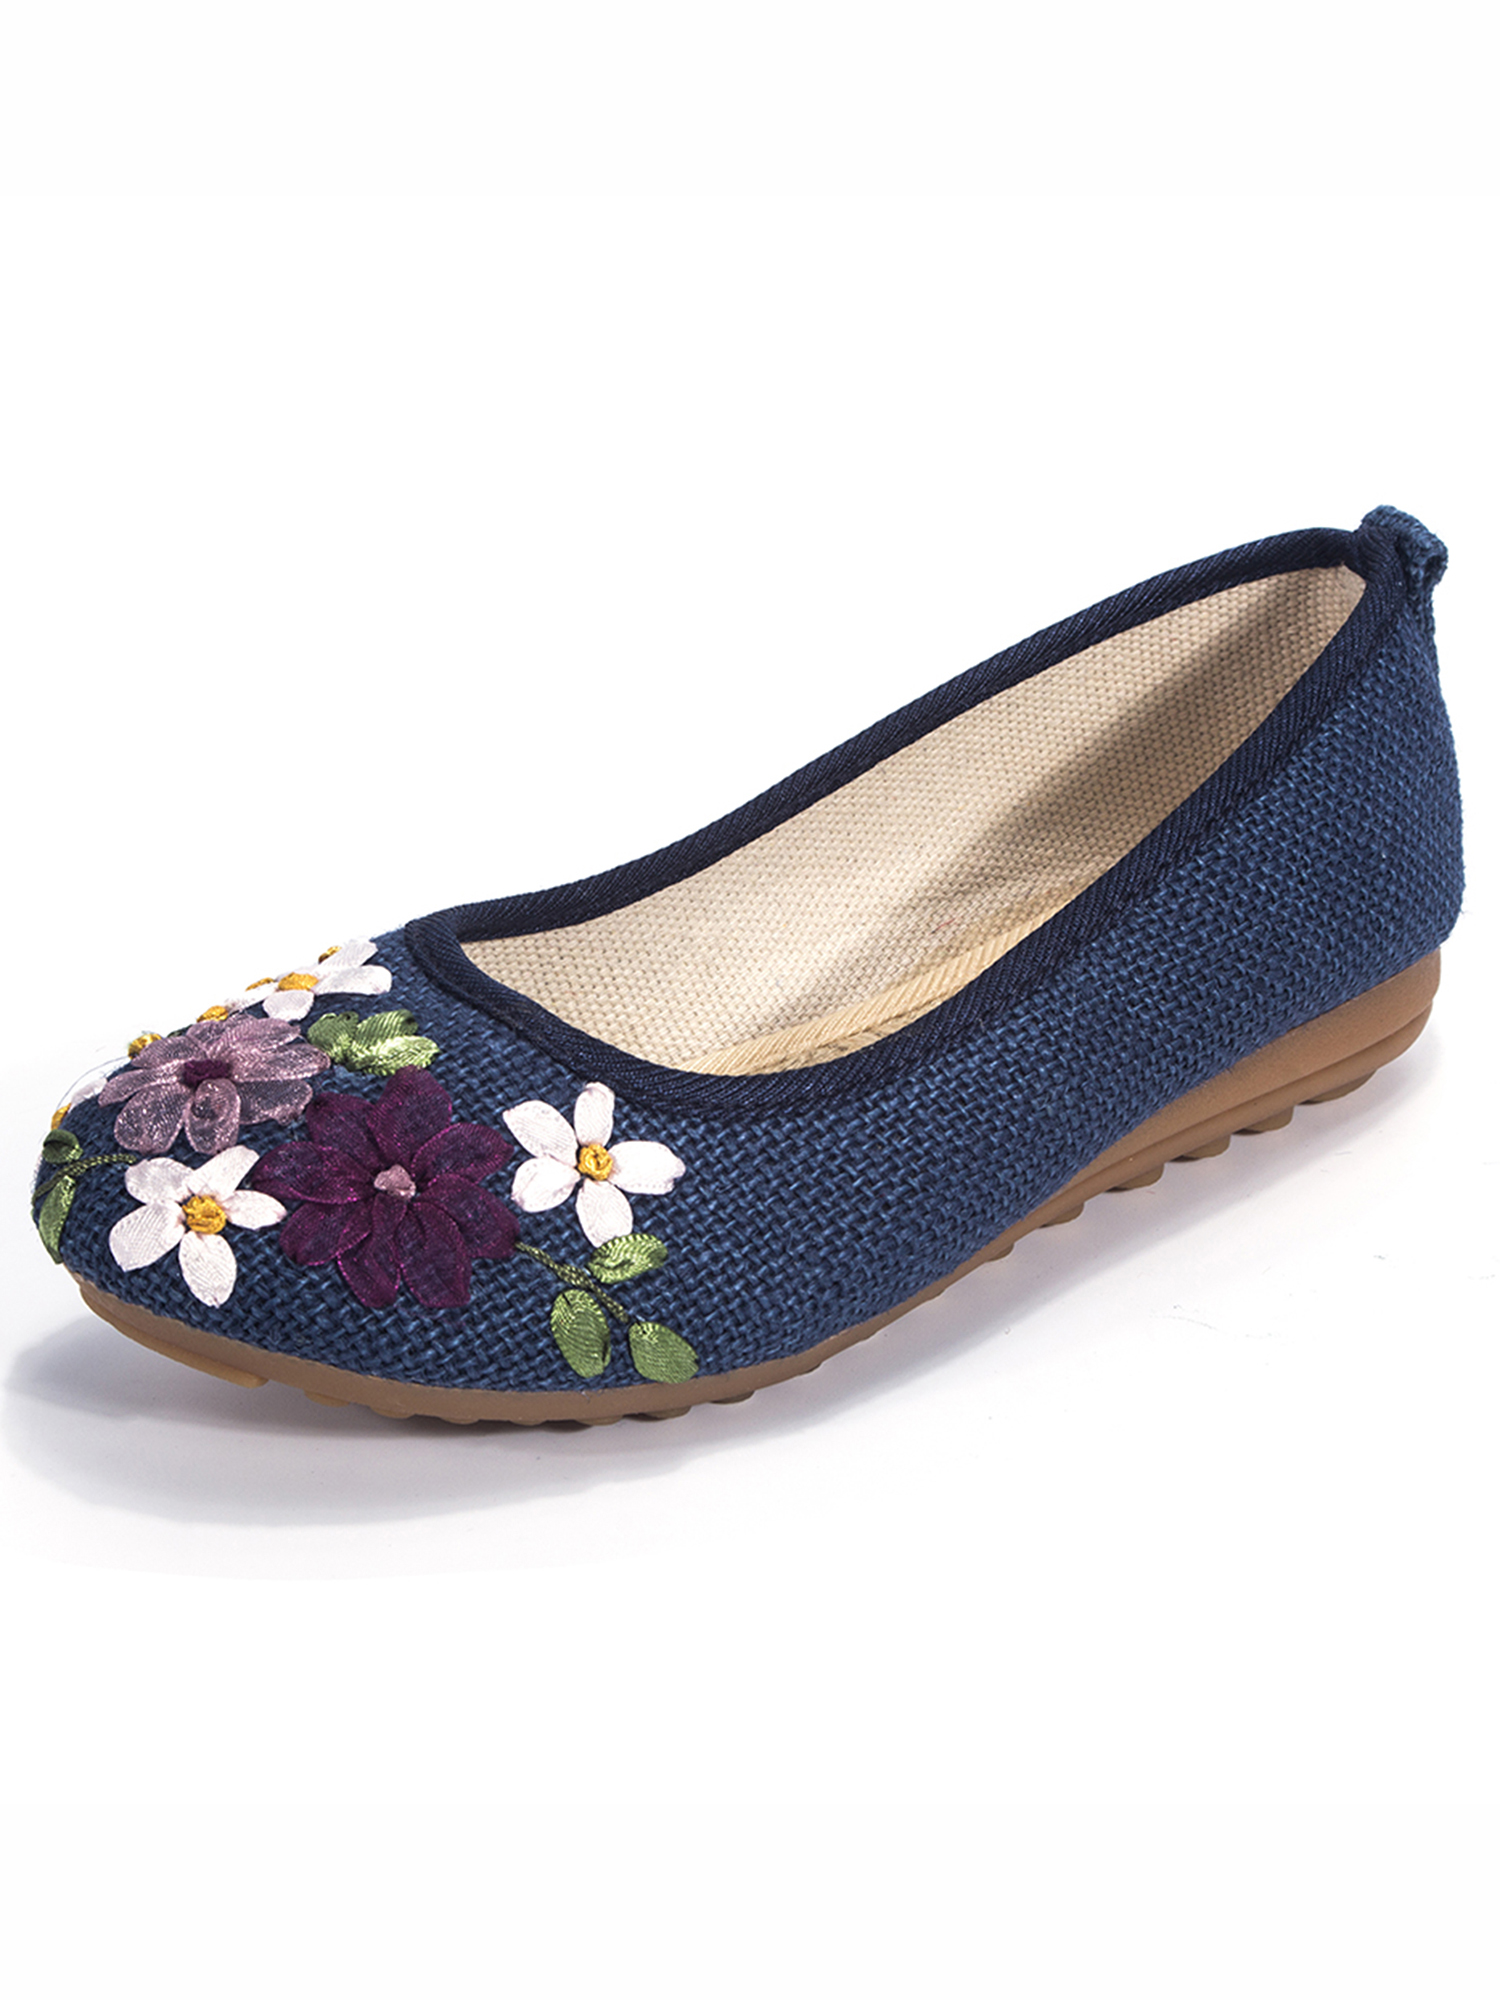 FANNYC Womens Women's Ethnic Style Casual Fit Flat Office Embroidered Shoes Ballet Flats Floral Embroidered Cut Platform Shoe Slip On Casual Driving Loafers Hemp soled shoes - image 1 of 7